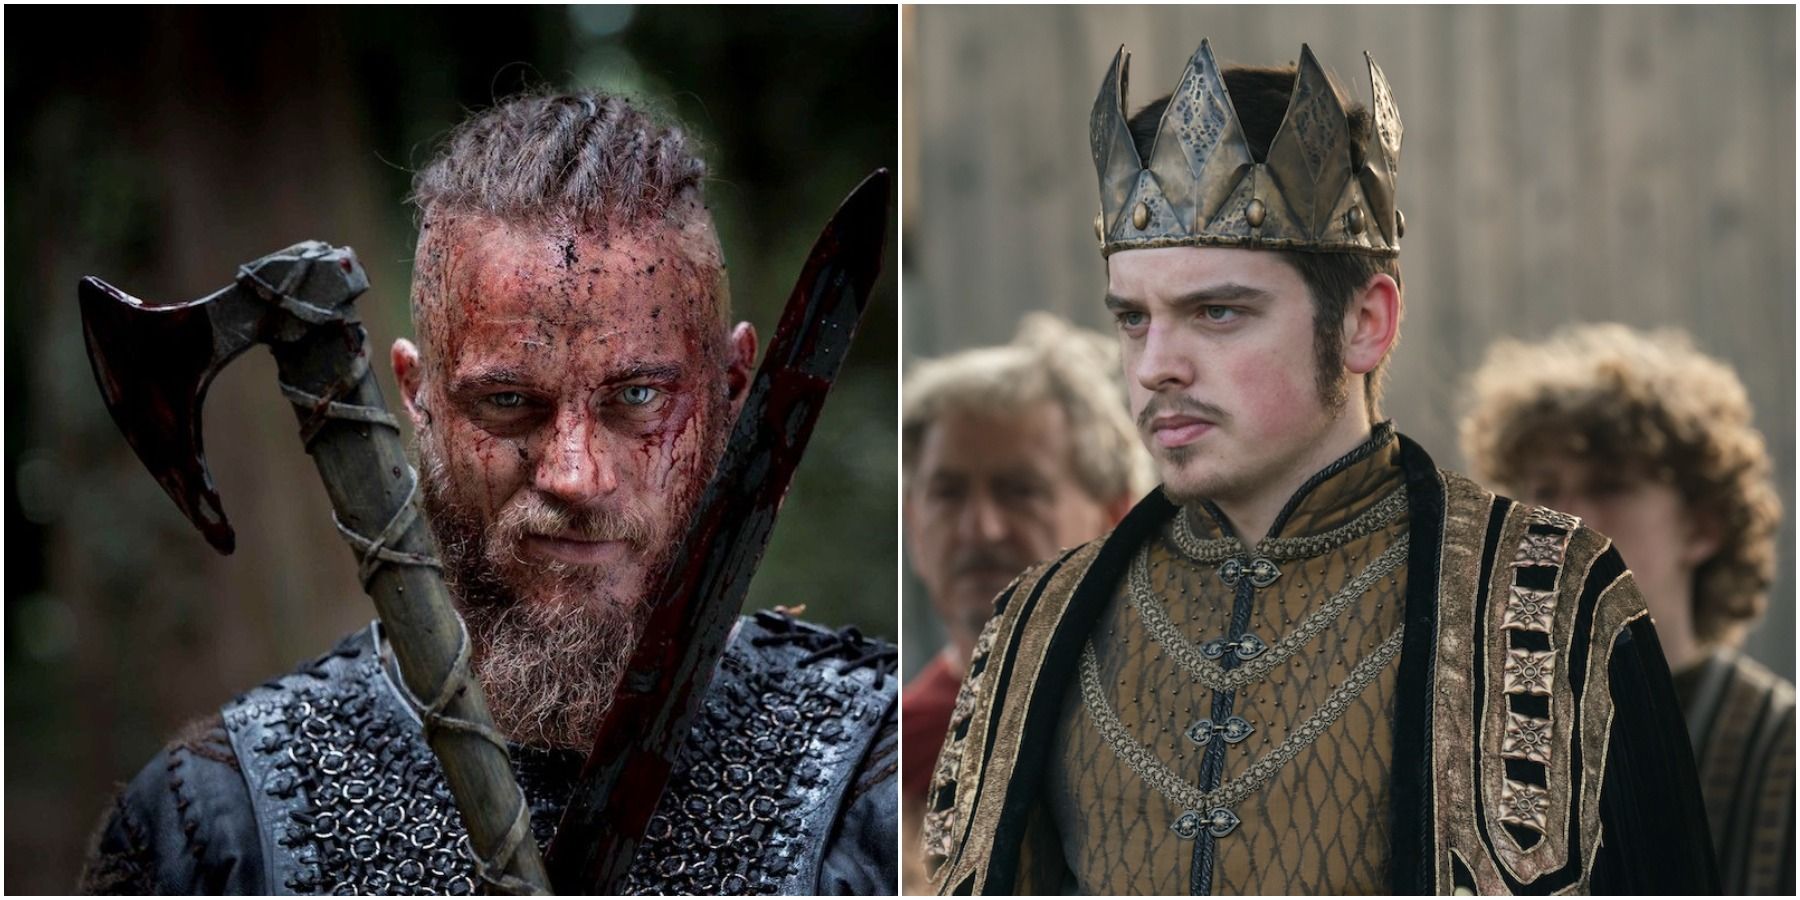 Fact vs Fiction In The Drama 'Vikings': An Archaeologist's Review